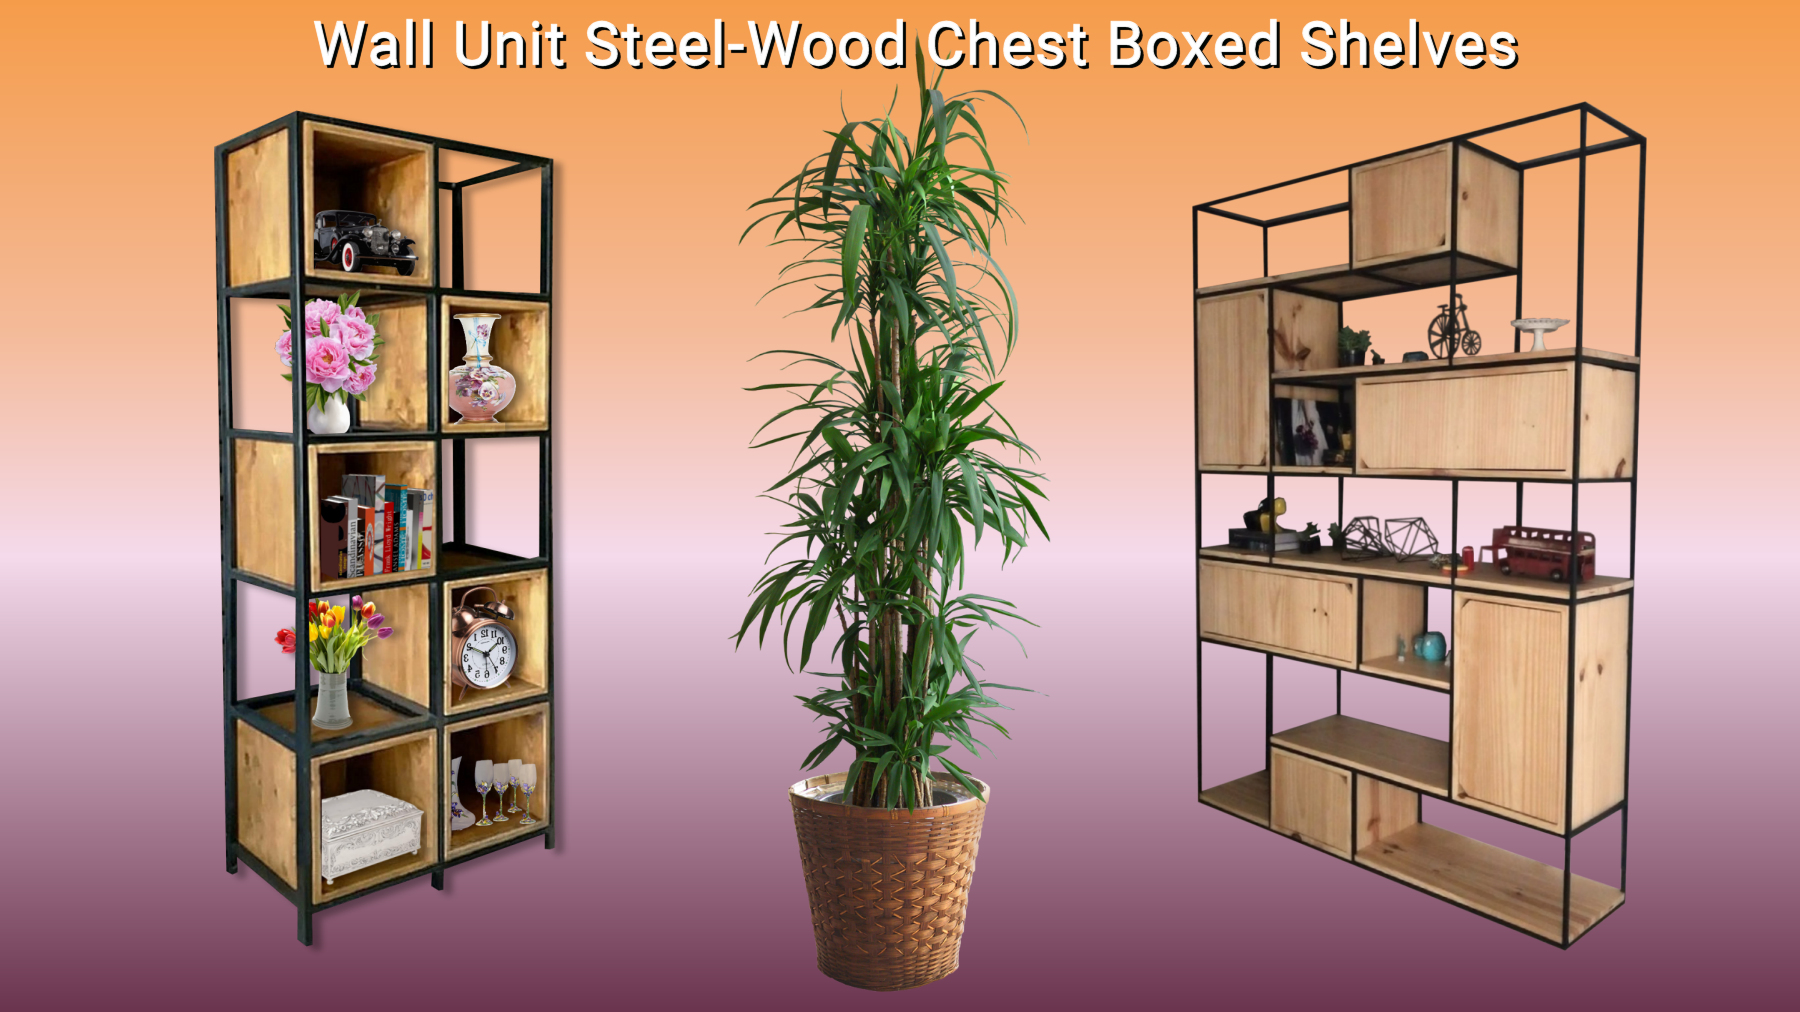 Wall Unit Steel-Wood Chest Boxed Shelves1